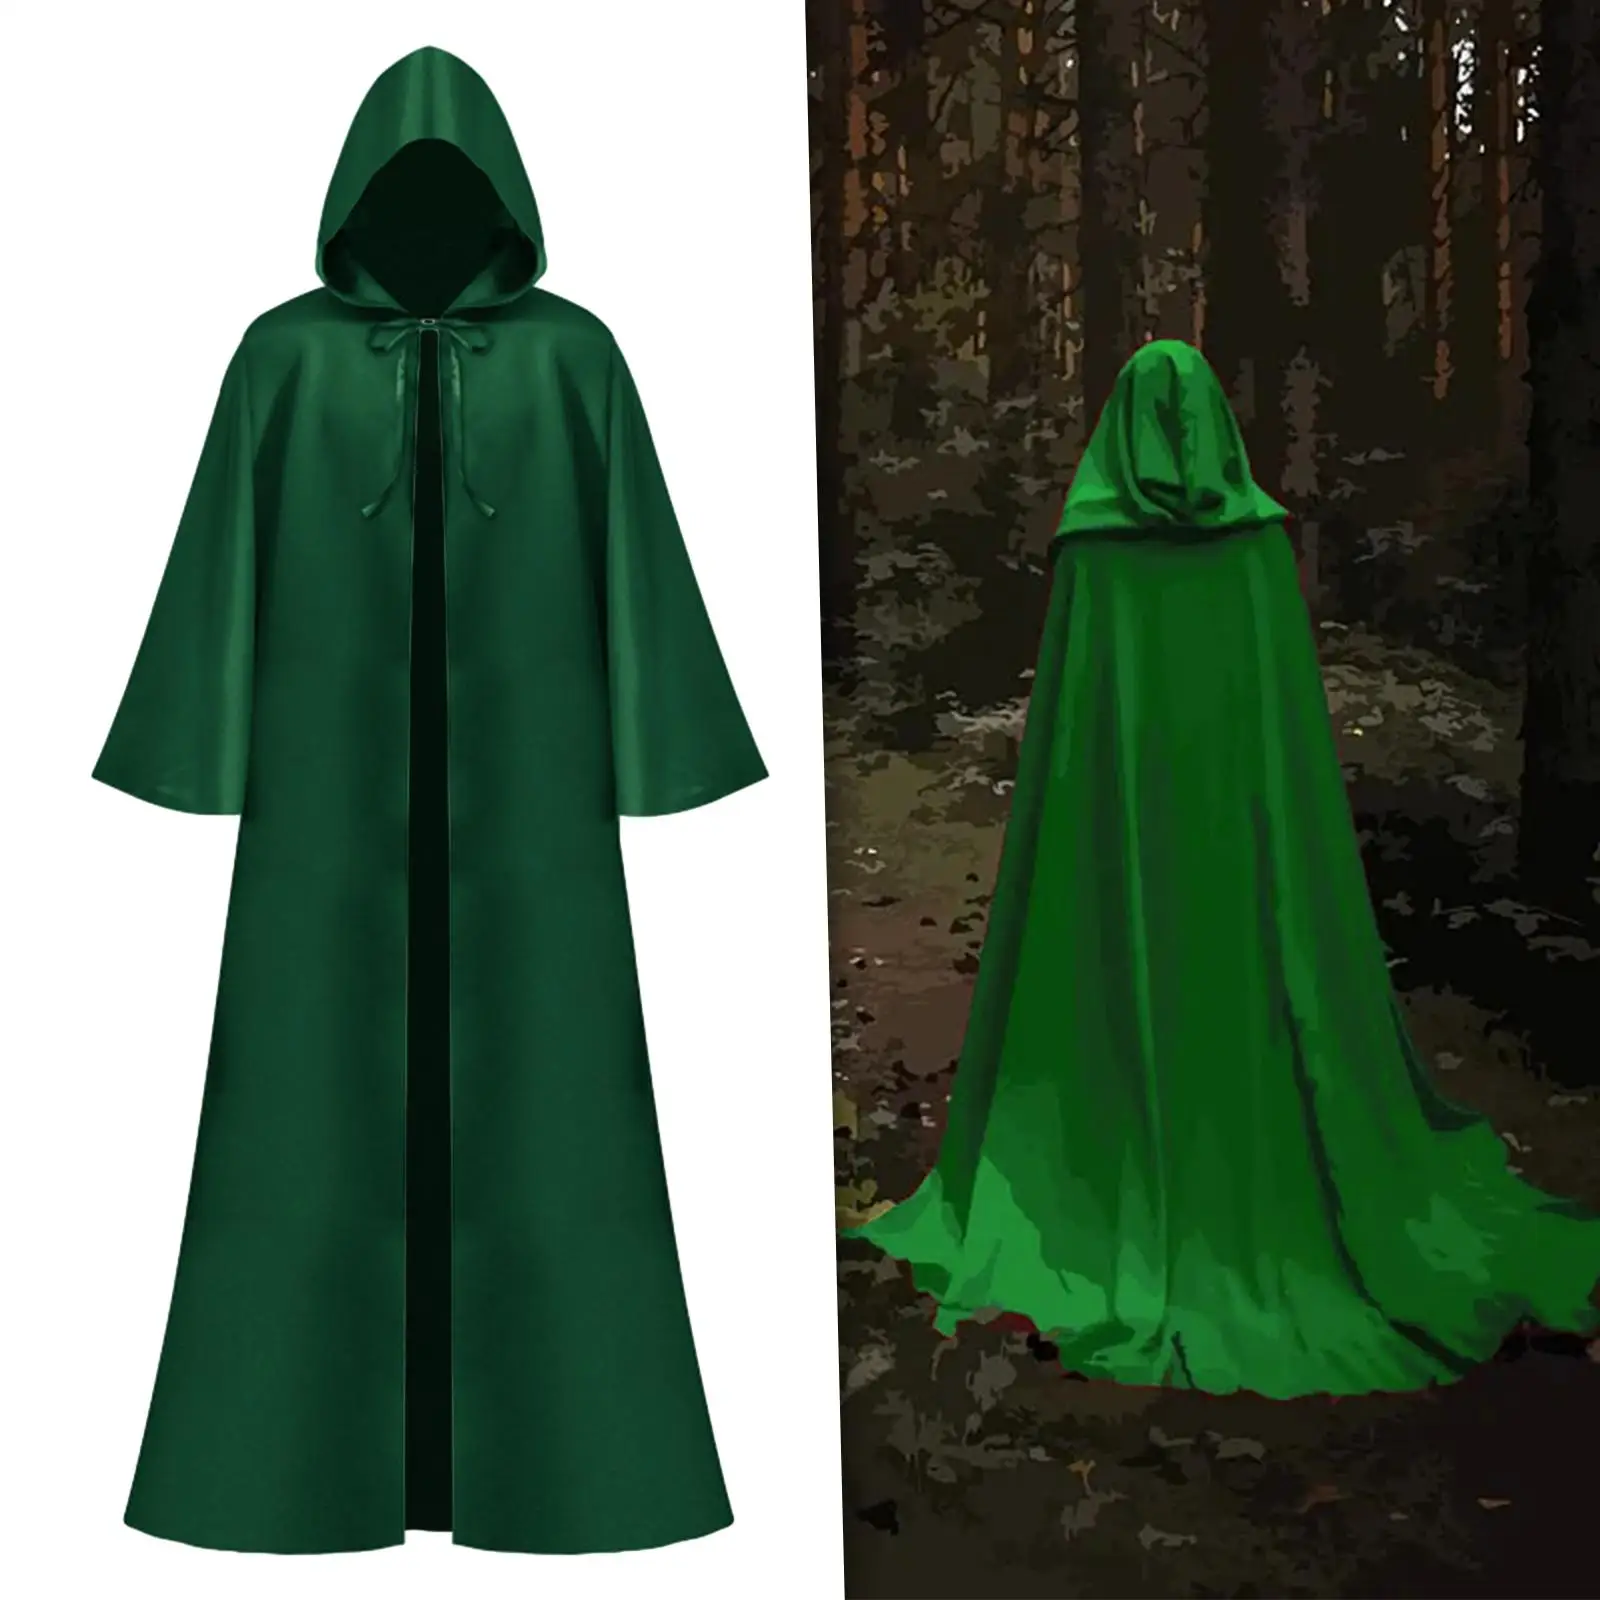 Halloween Cloak Dress up Full Length Devil Cape Long Cape Witch Cape Gothic Grim Cowl Cosplay Cape for Easter Vintage Gathering